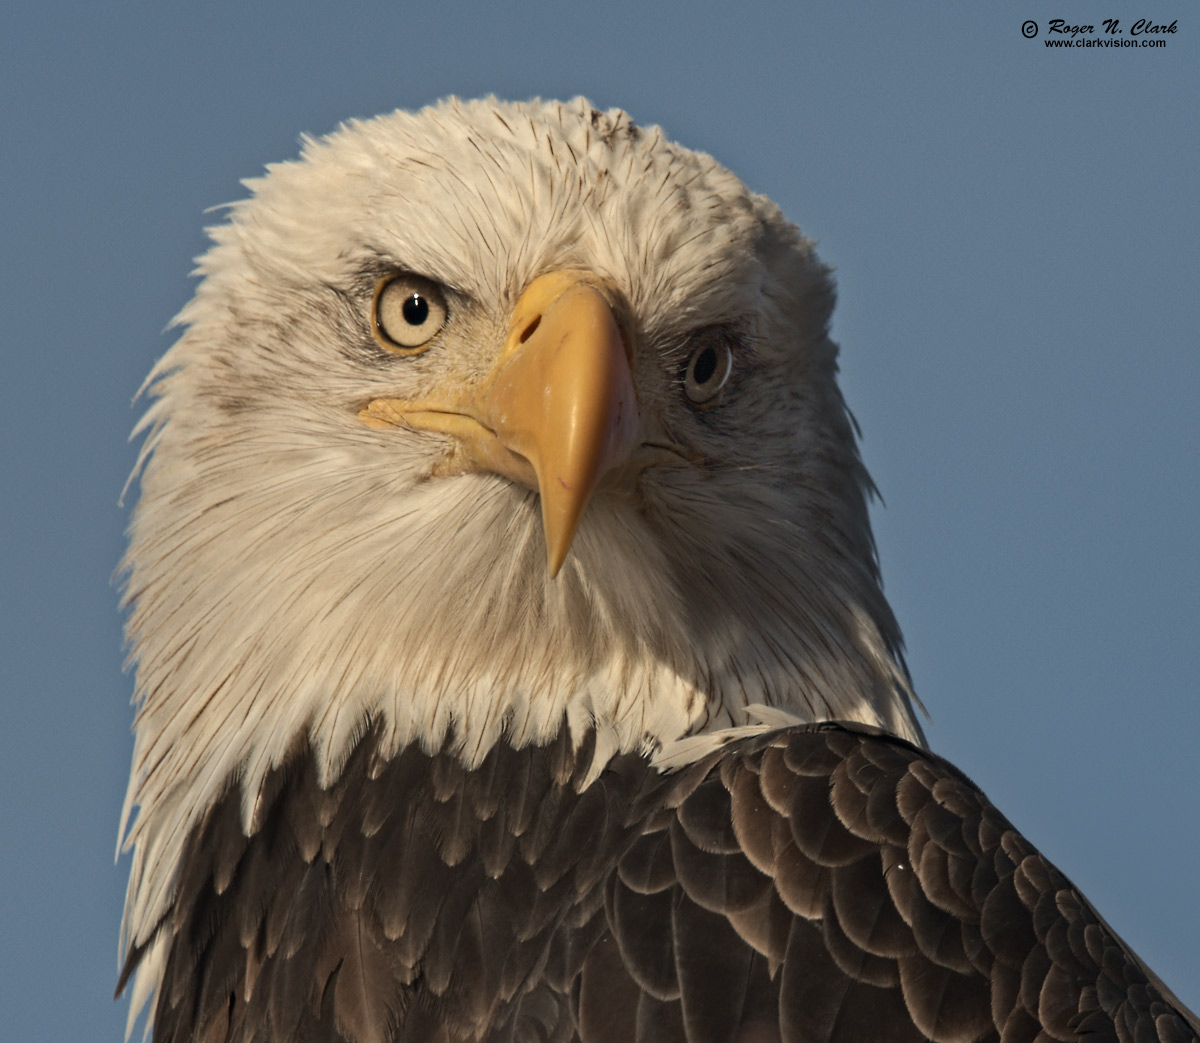 image bald.eagle.rnclark-c11-2019-IMG_3505-rth.b-1200s.jpg is Copyrighted by Roger N. Clark, www.clarkvision.com